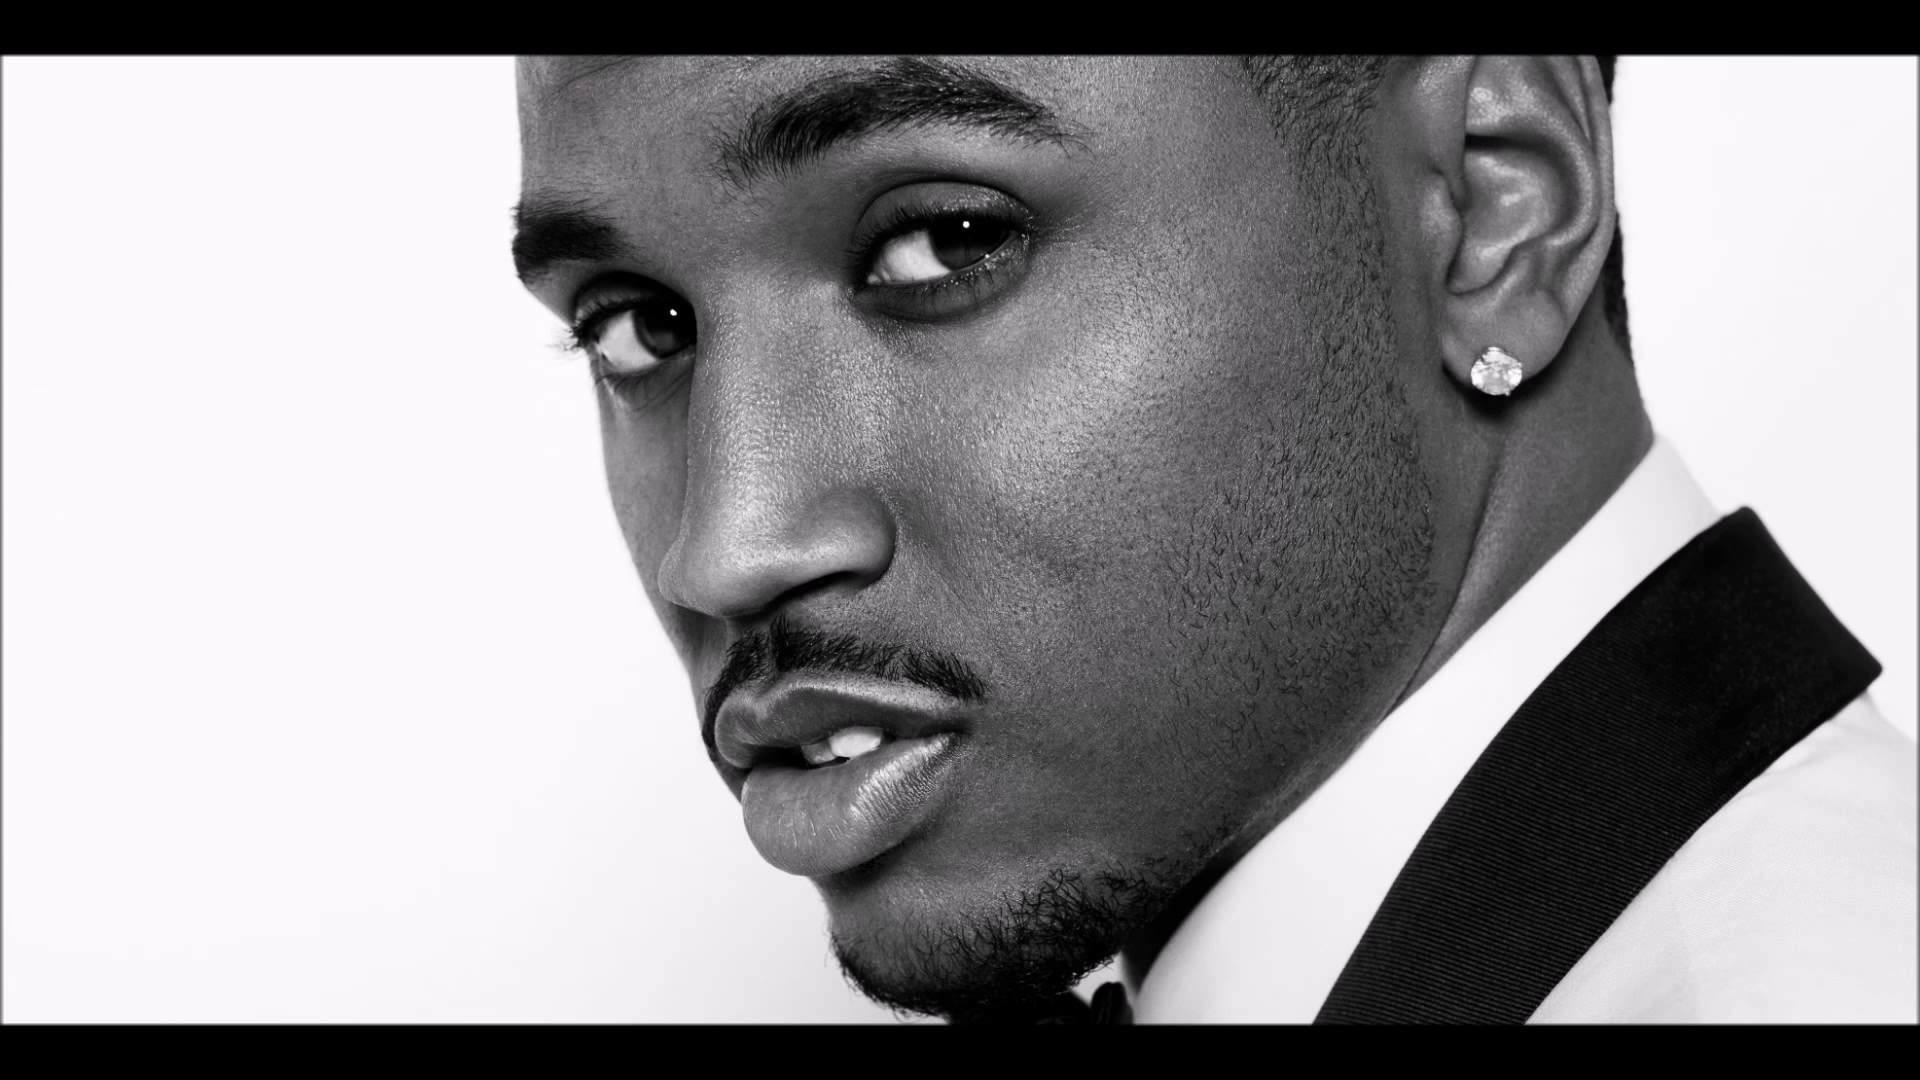 trey songz wallpapers wallpaper cave on trey songz wallpapers